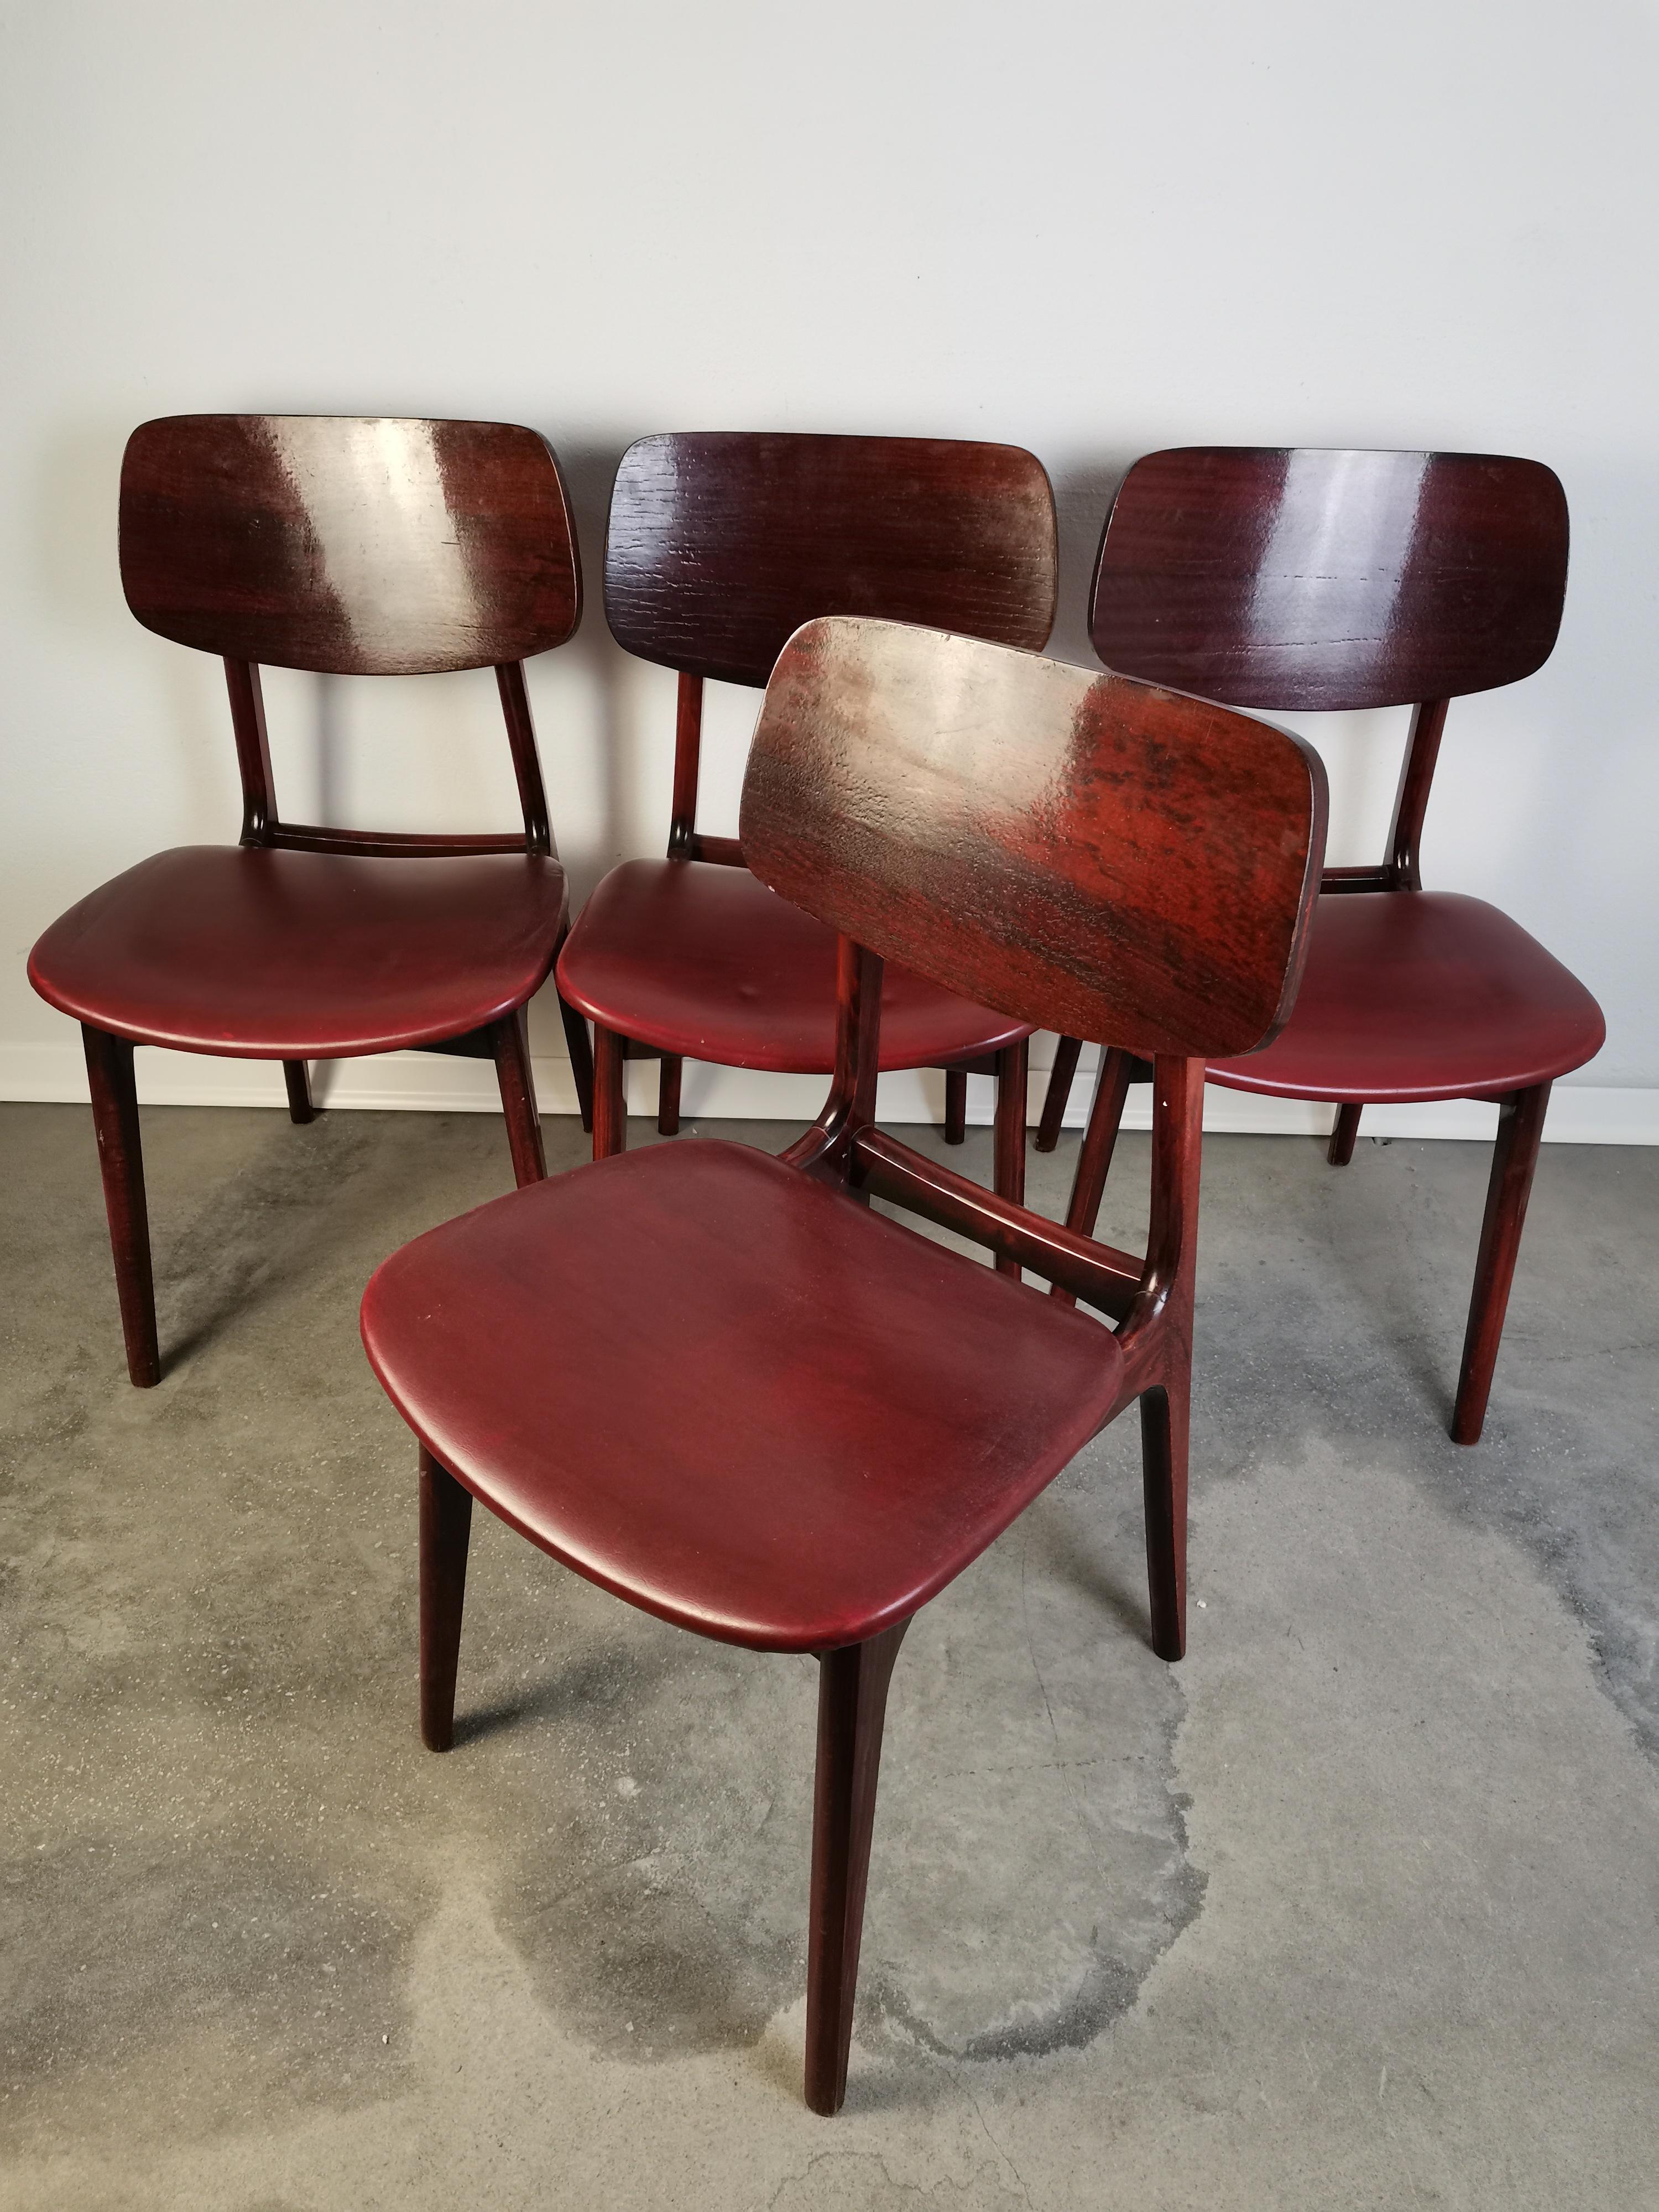 Dining chairs, 1970s
Manufacturer: Javor Pivka.
Country of Manufacturer: Slovenia/Yugoslavia.
Period: 1970s.
Style: mid century, danish classic.
Materials: wood, faux leather.
Condition: very good original vintage condition, few traces of